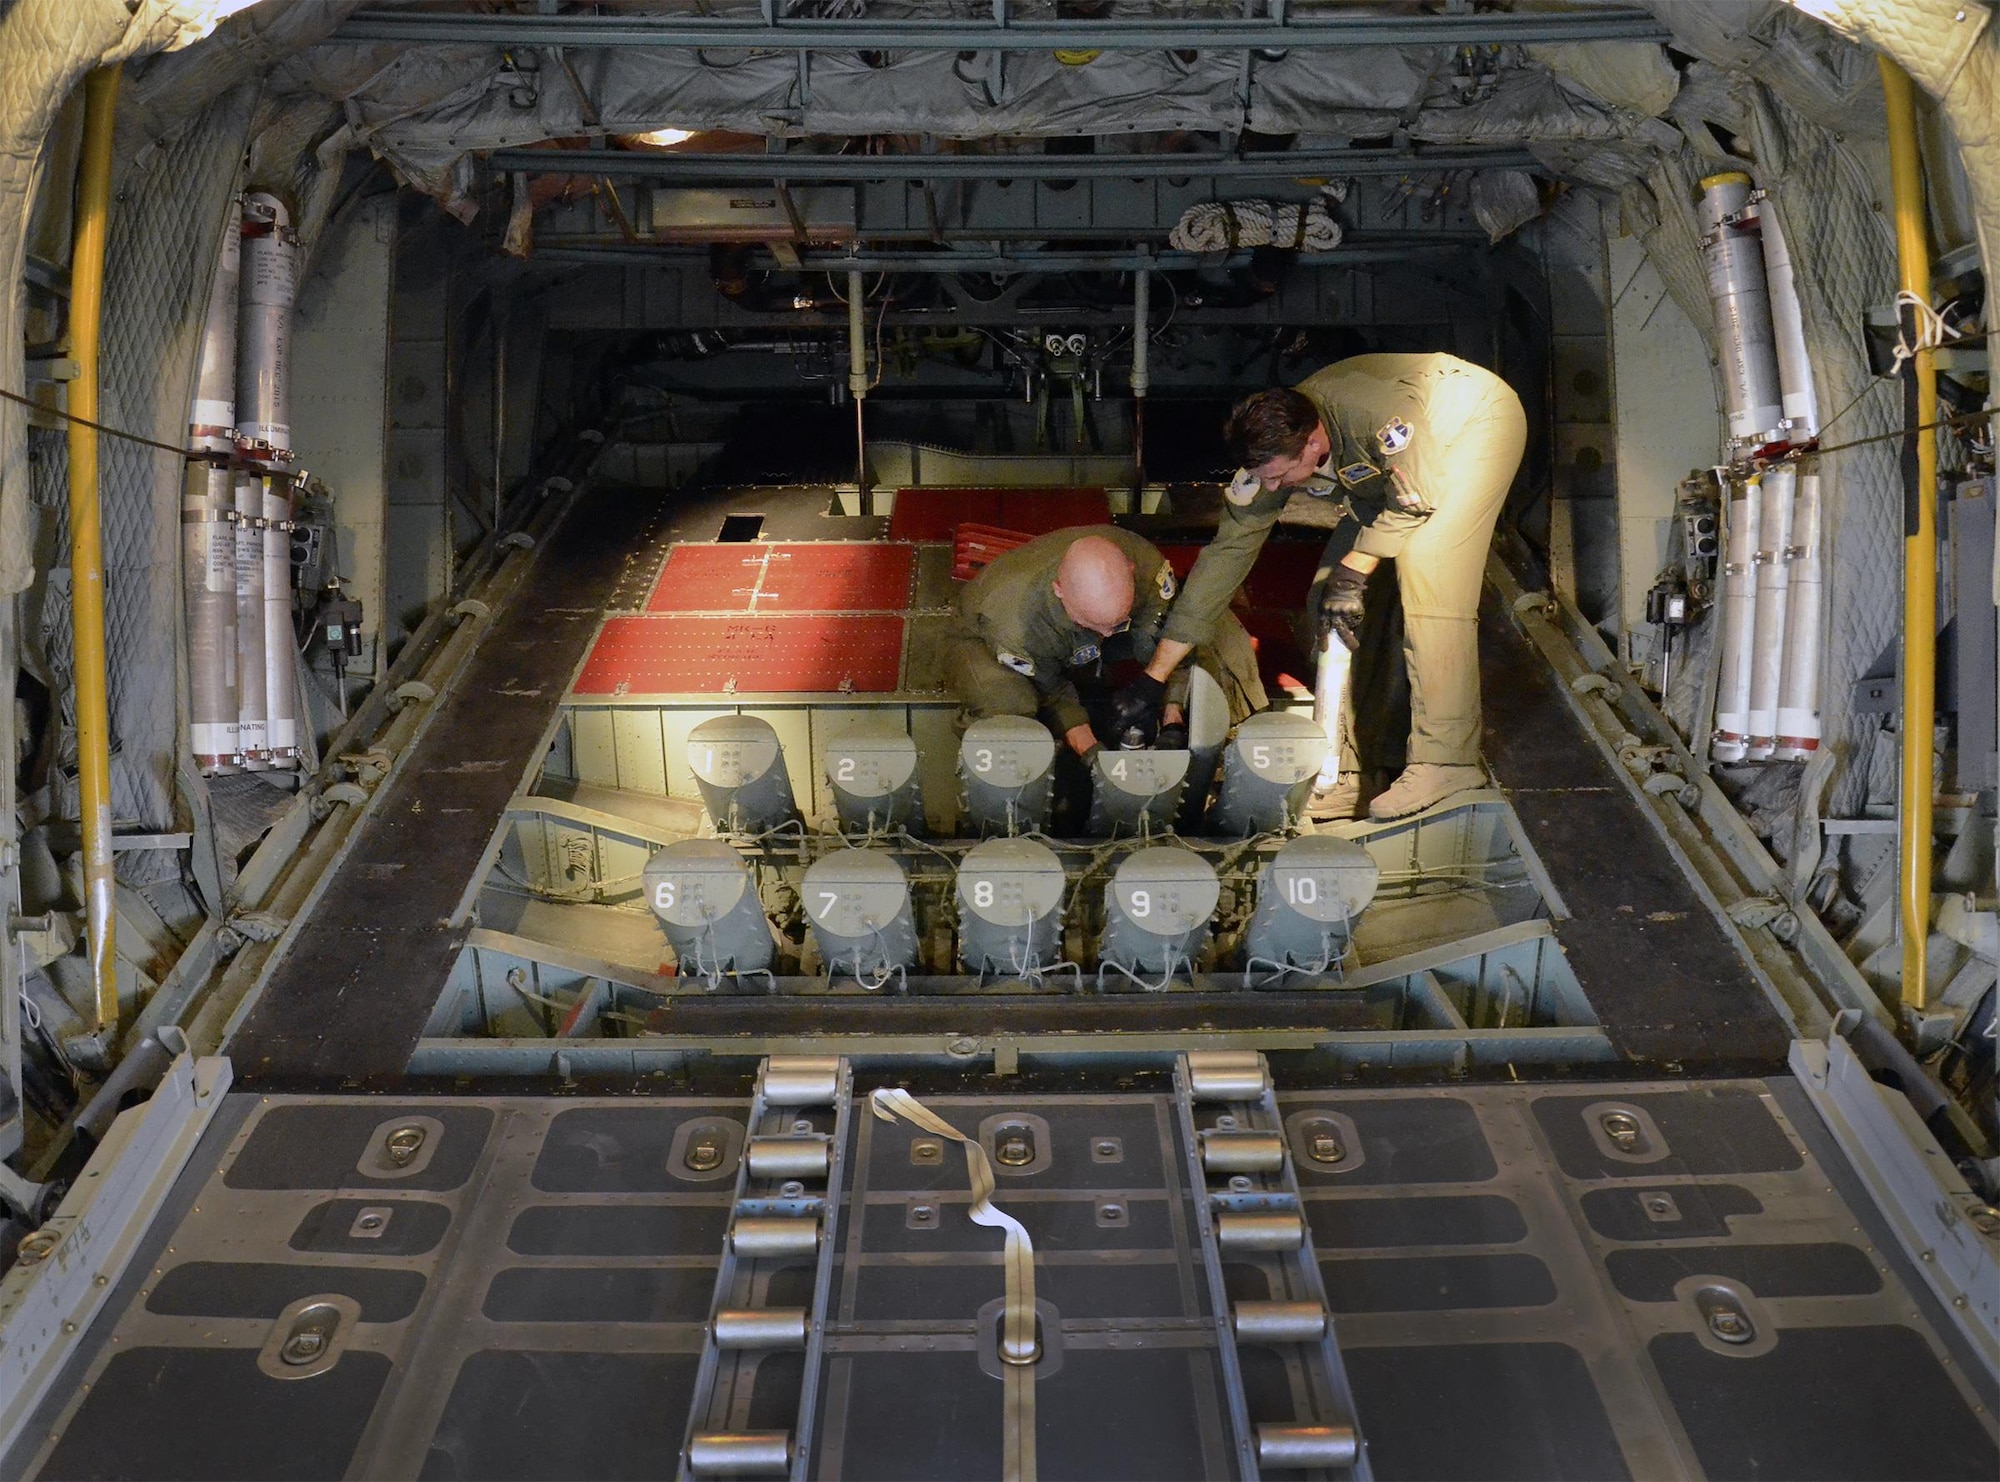 Air Force Reserve aircrew members load cannisters of sea dye into the flare launcher system of an HC-130P/N King aircraft prior to launching a search-and-rescue mission. The dye, which spreads into a large, bright flourescent green patch in seawater, is used to mark the location of a survivor during a search operation. The reservists are members of the 920th Rescue Wing, the Air Force Reserve’s only rescue unit. (U.S. Air Force photo/Master Sgt. Paul Flipse) 